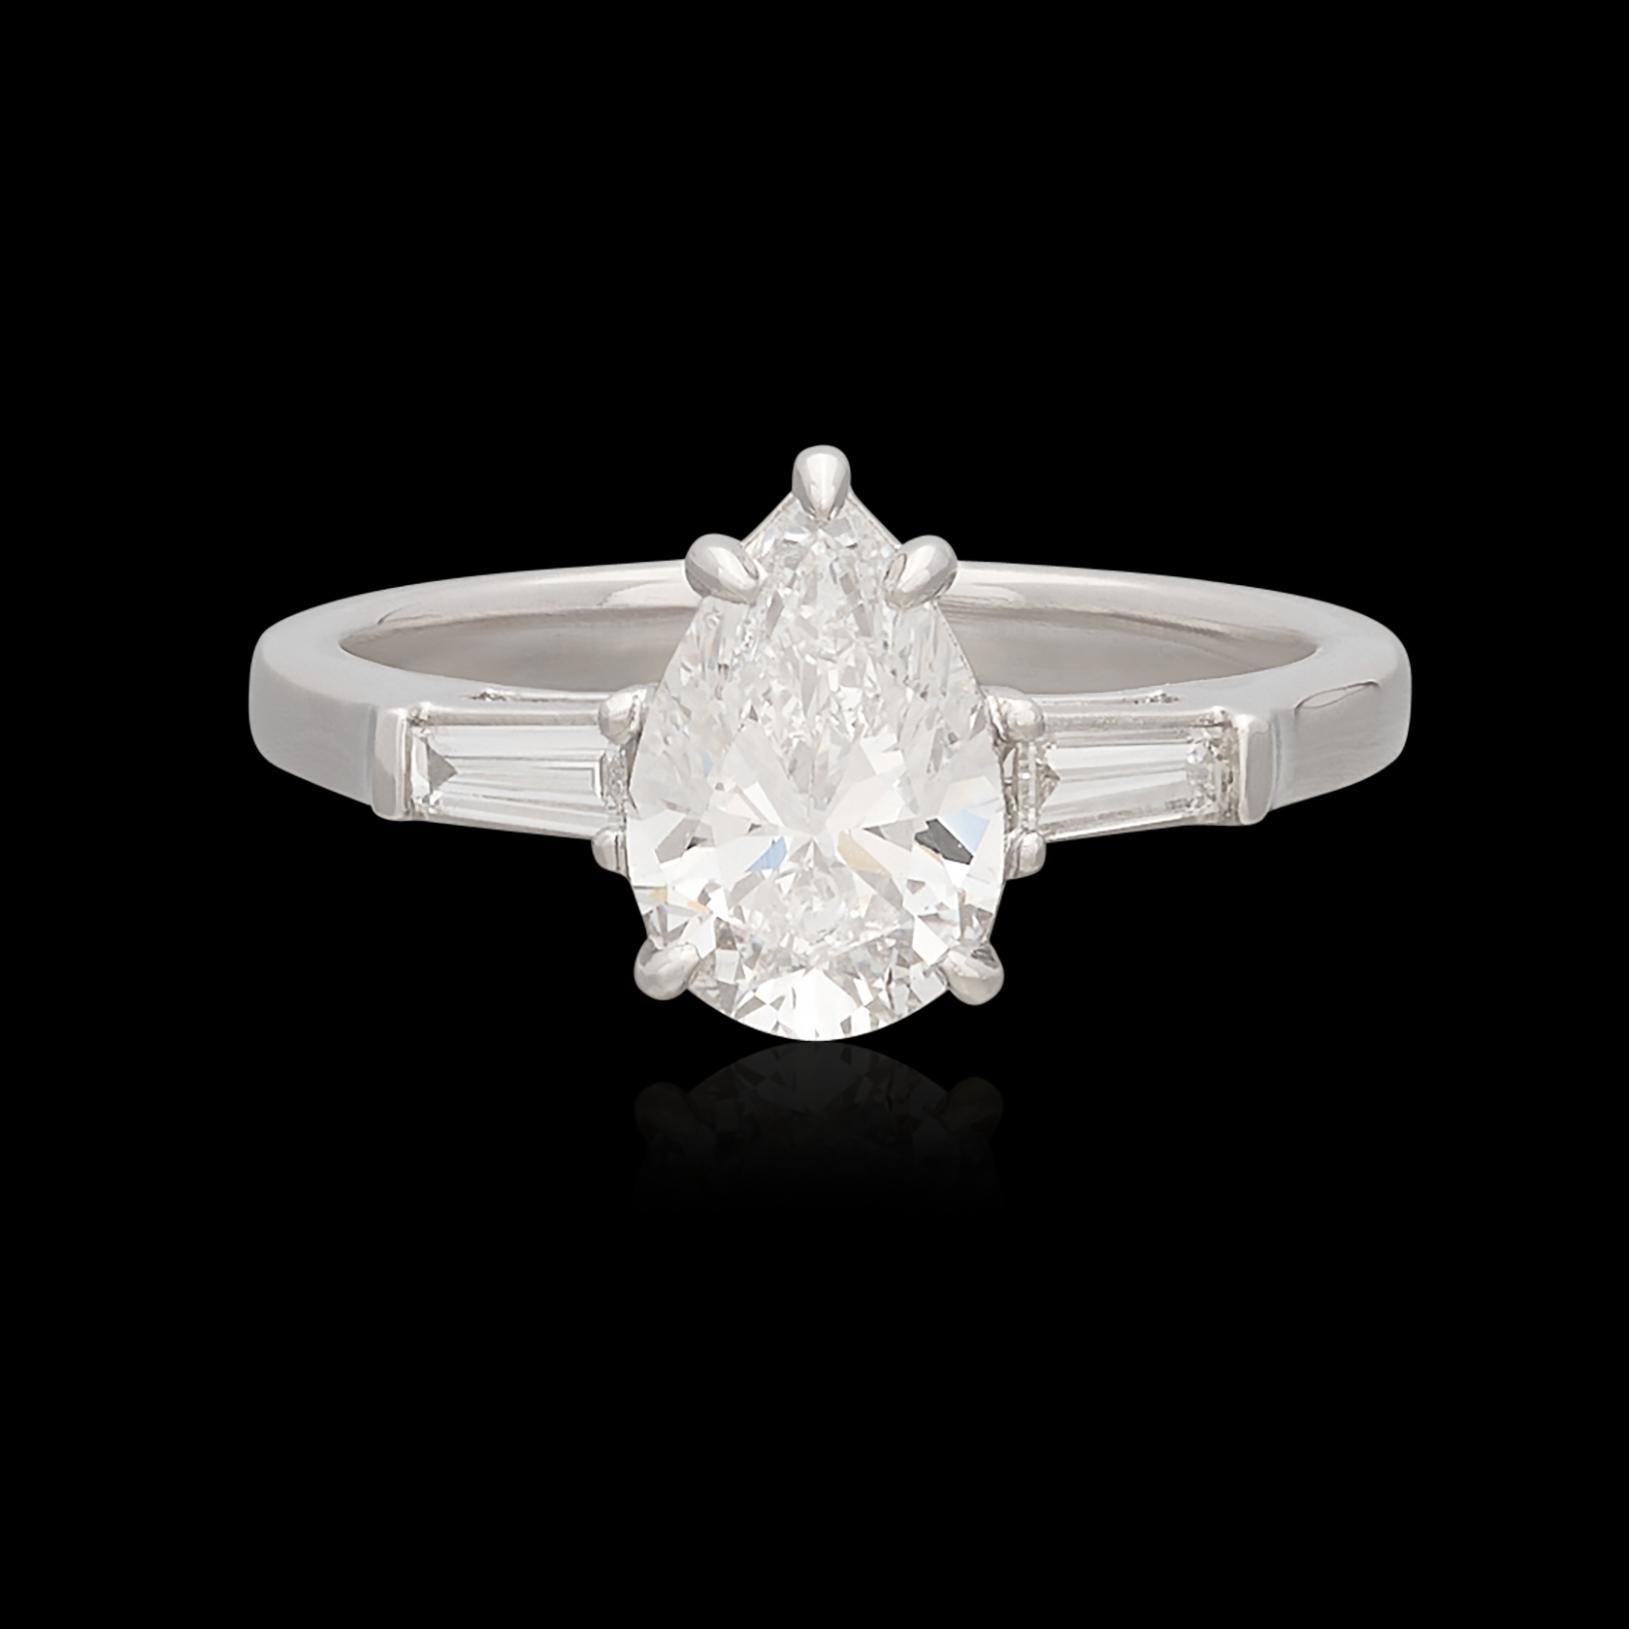 When only the best will do! This custom platinum ring features a near perfect 1.50 carat pear shaped diamond graded by the Gemological Institute of America as D color (as white as diamonds get!) and Internally Flawless clarity. The center diamond is